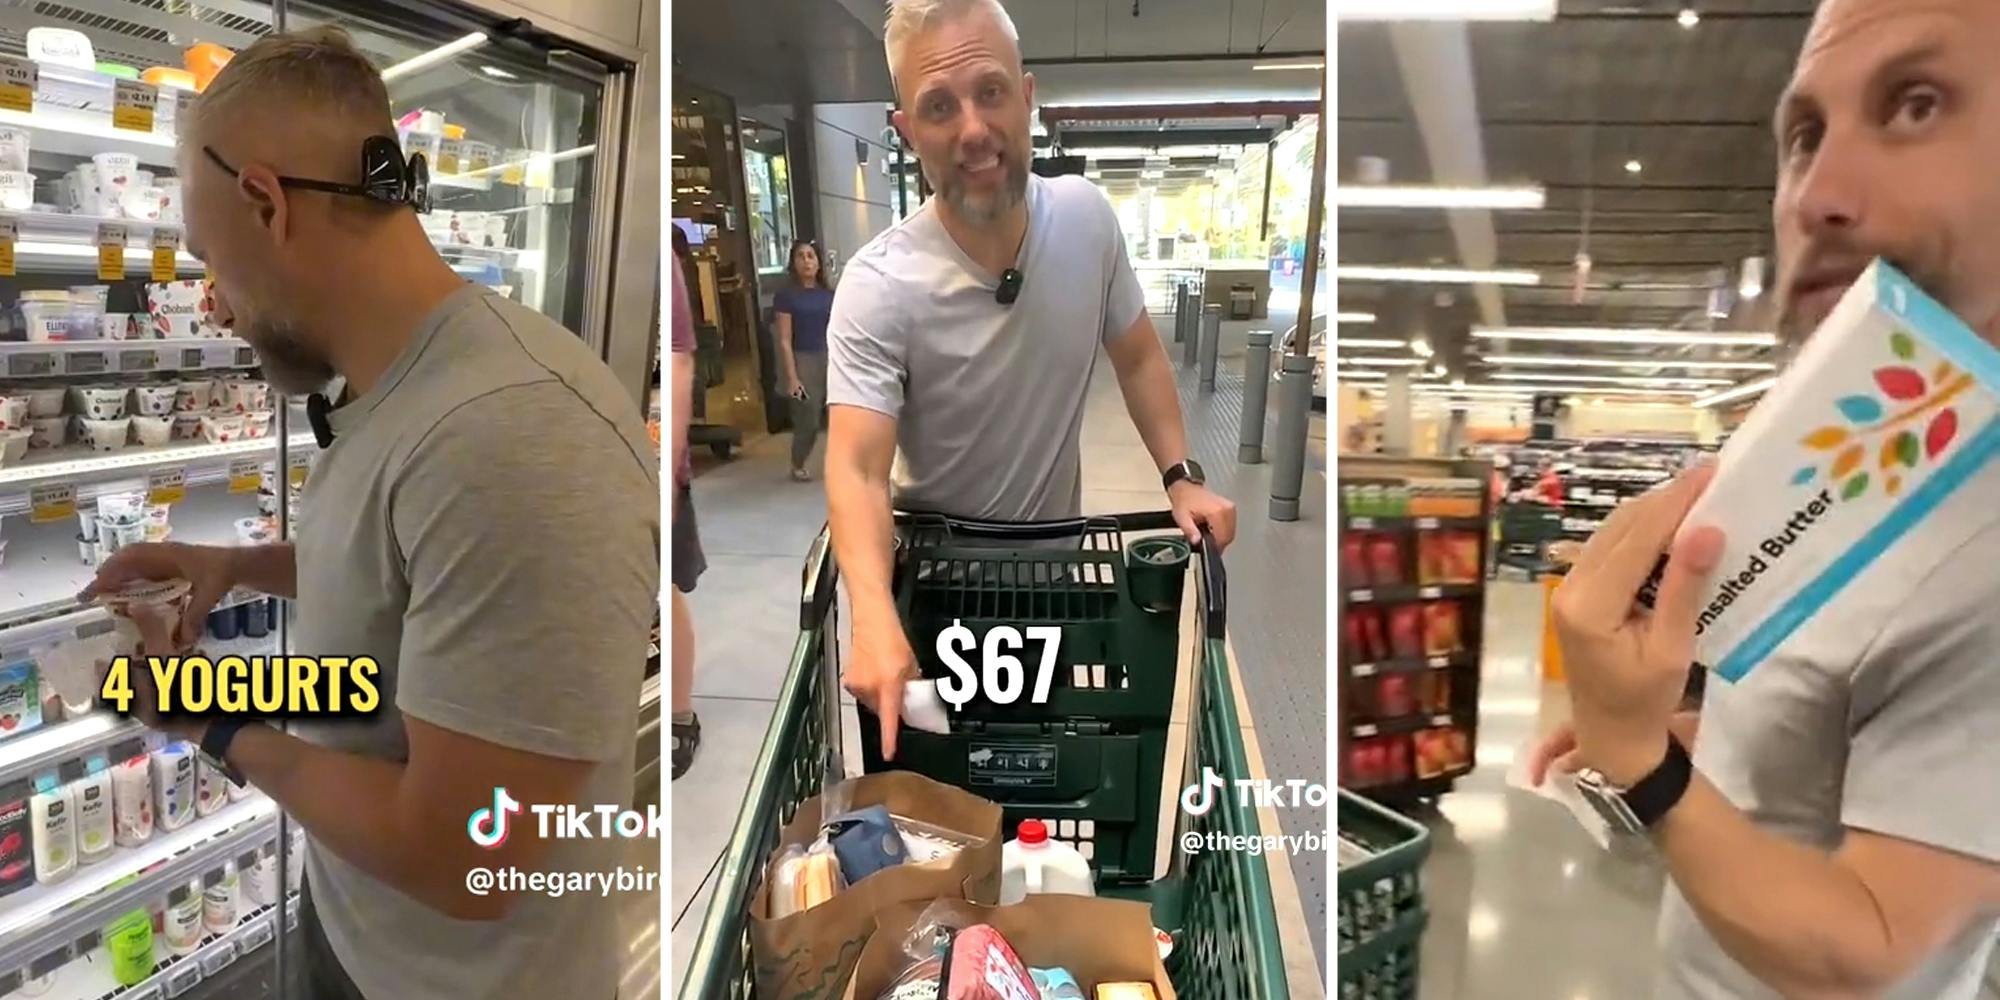 'Prices have gone up a lot since COVID': Man shows the increase in grocery prices since 2019